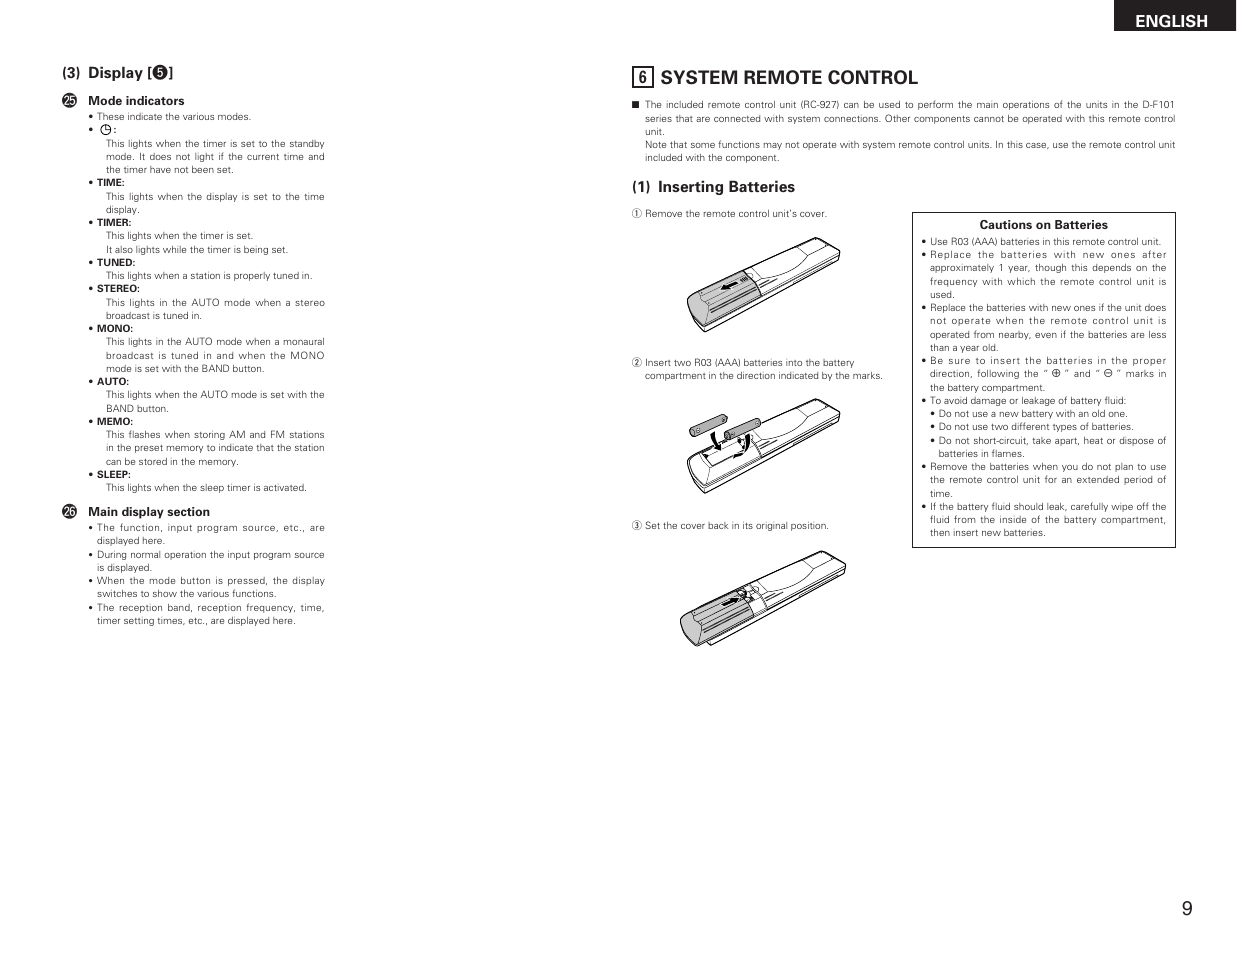 System remote control, English (3) display [ t ] @5, 1) inserting batteries  | Denon DRA-F101 User Manual | Page 9 / 37 | Original mode